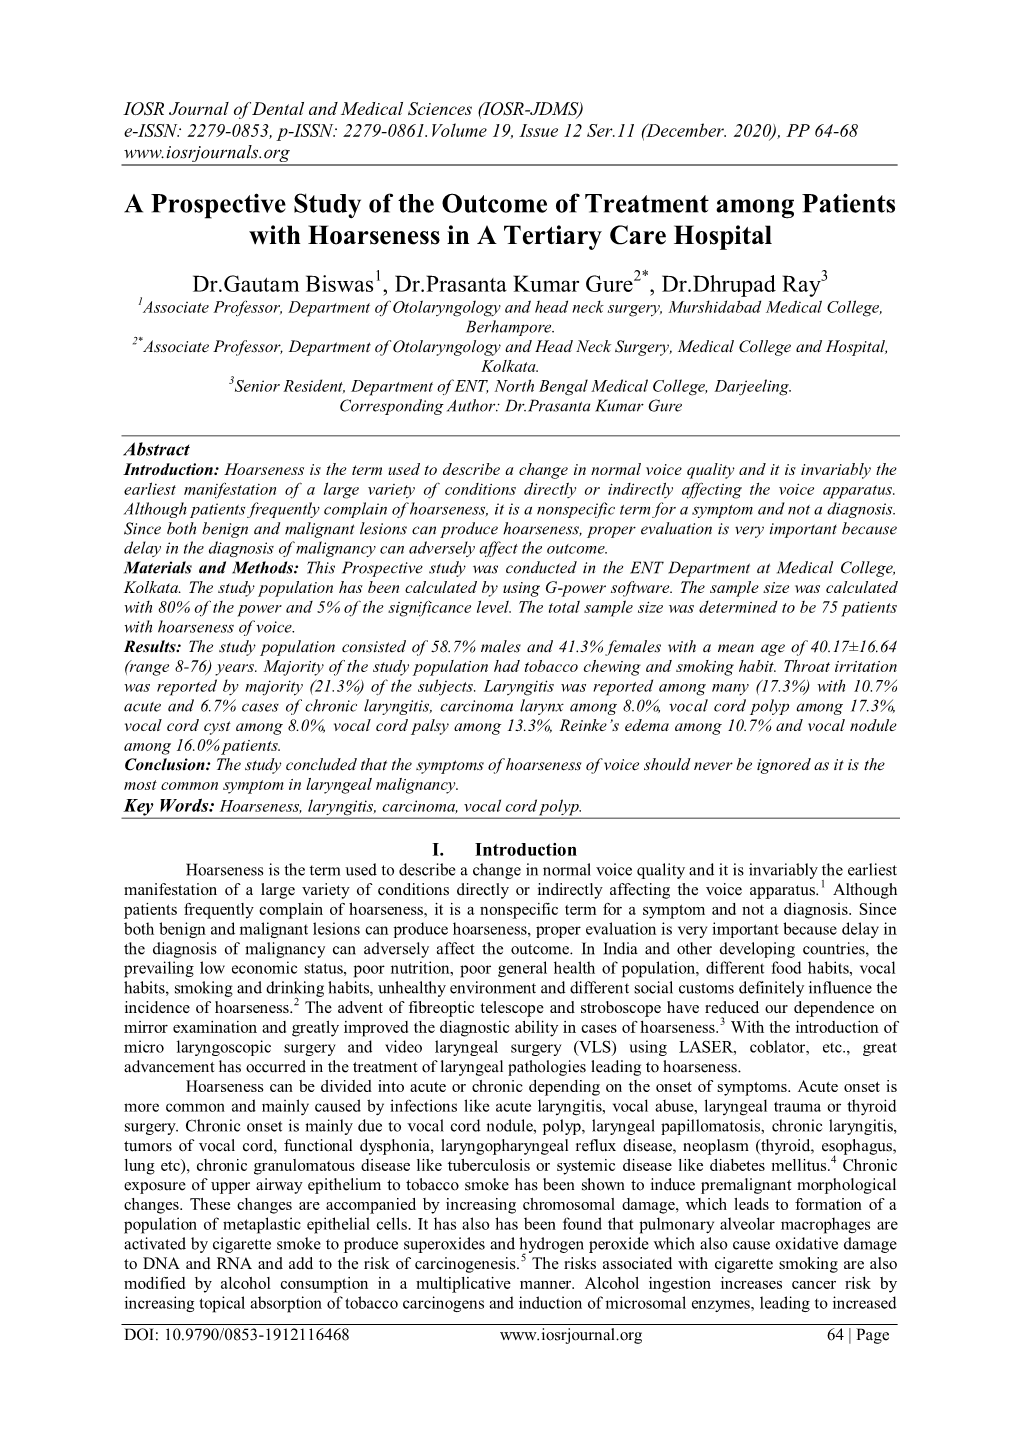 A Prospective Study of the Outcome of Treatment Among Patients with Hoarseness in a Tertiary Care Hospital